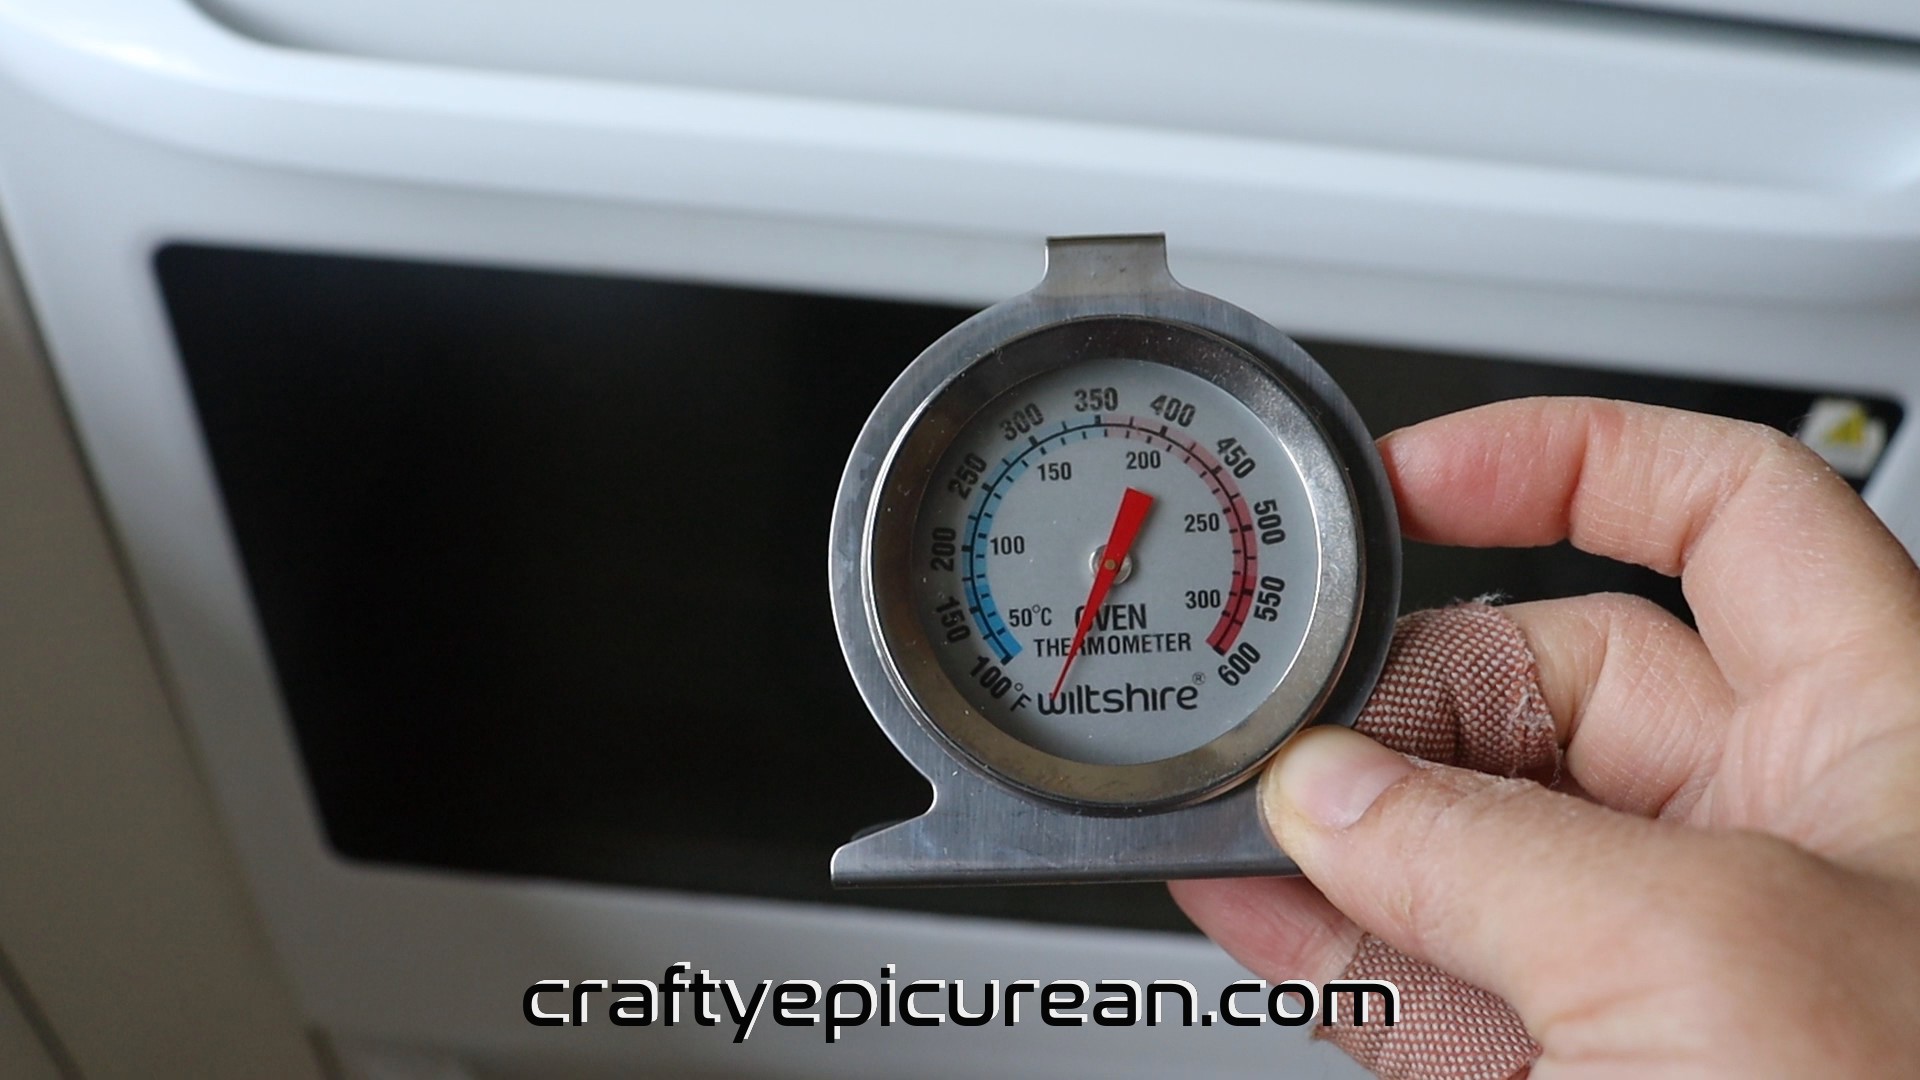 https://craftyepicurean.com/wp-content/uploads/2021/06/Using-Oven-Thermometer-for-Oven-Temperature.jpg